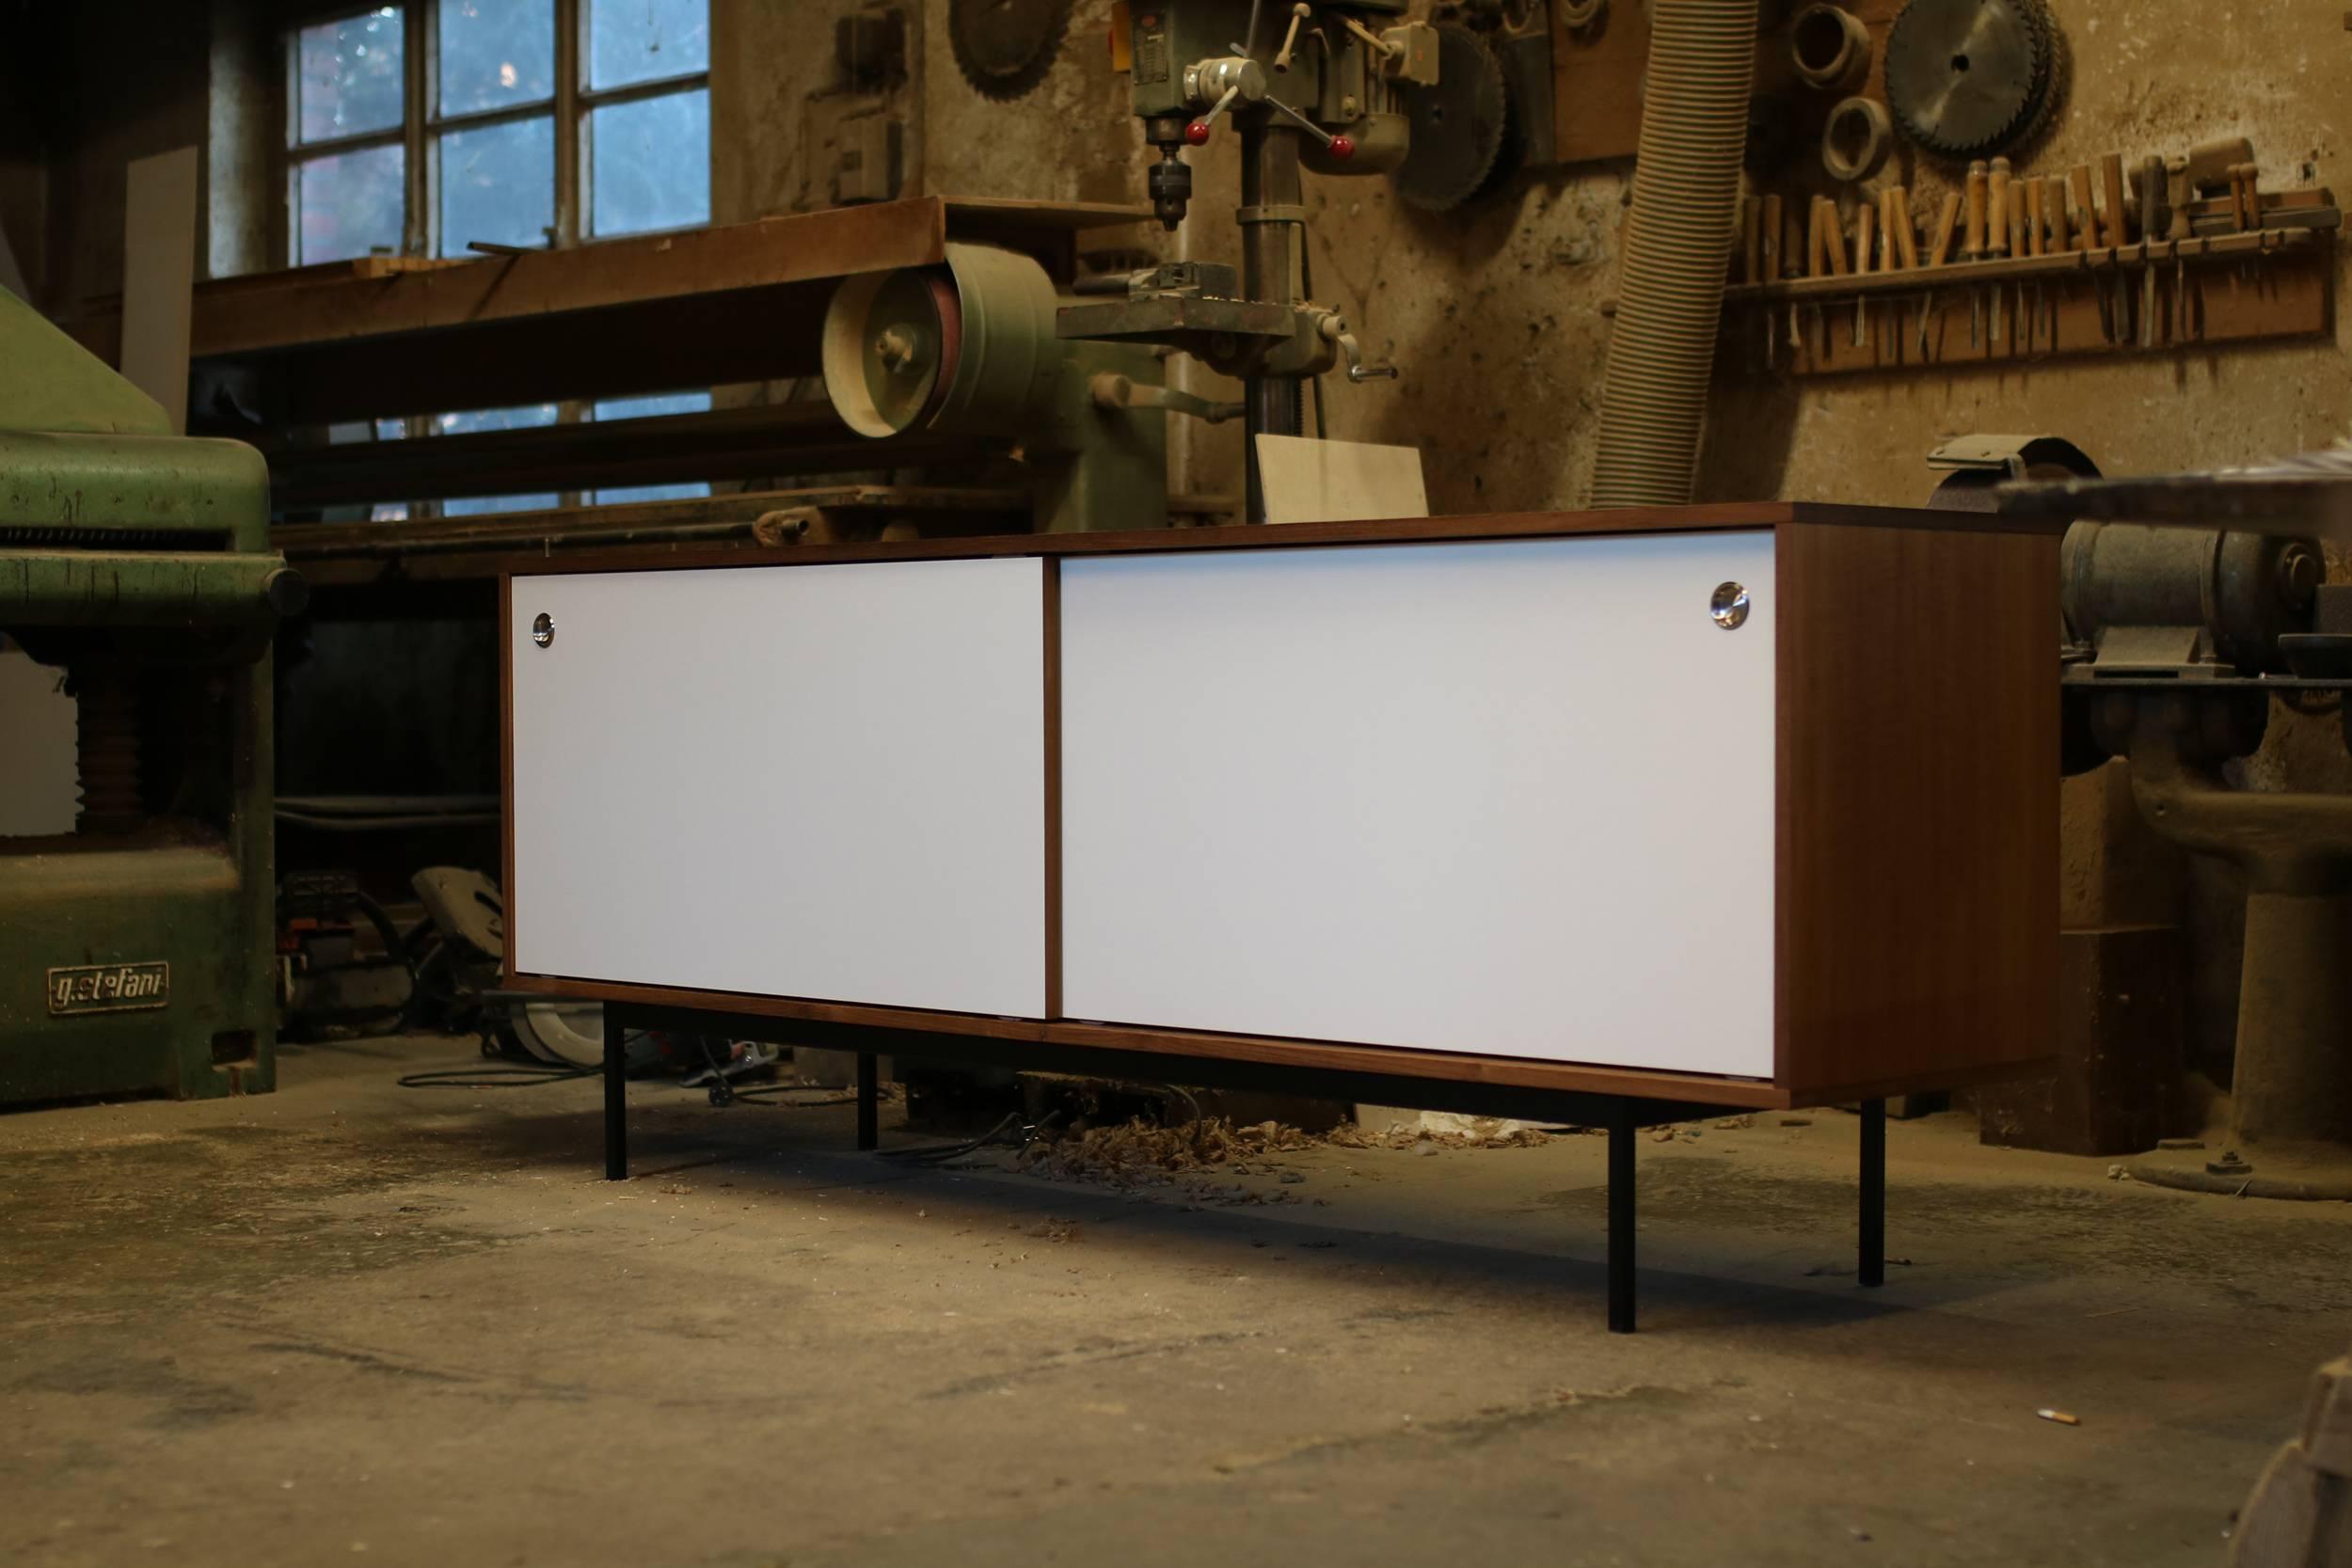 Beautiful teak sideboard, freestanding, Made in Germany, design by Nathan Lindberg (Nathan Lindberg Design)
White HPL (Formica) sliding doors with stainless steel door handles, iron base powder coated in black.
Best condition, the sideboard was